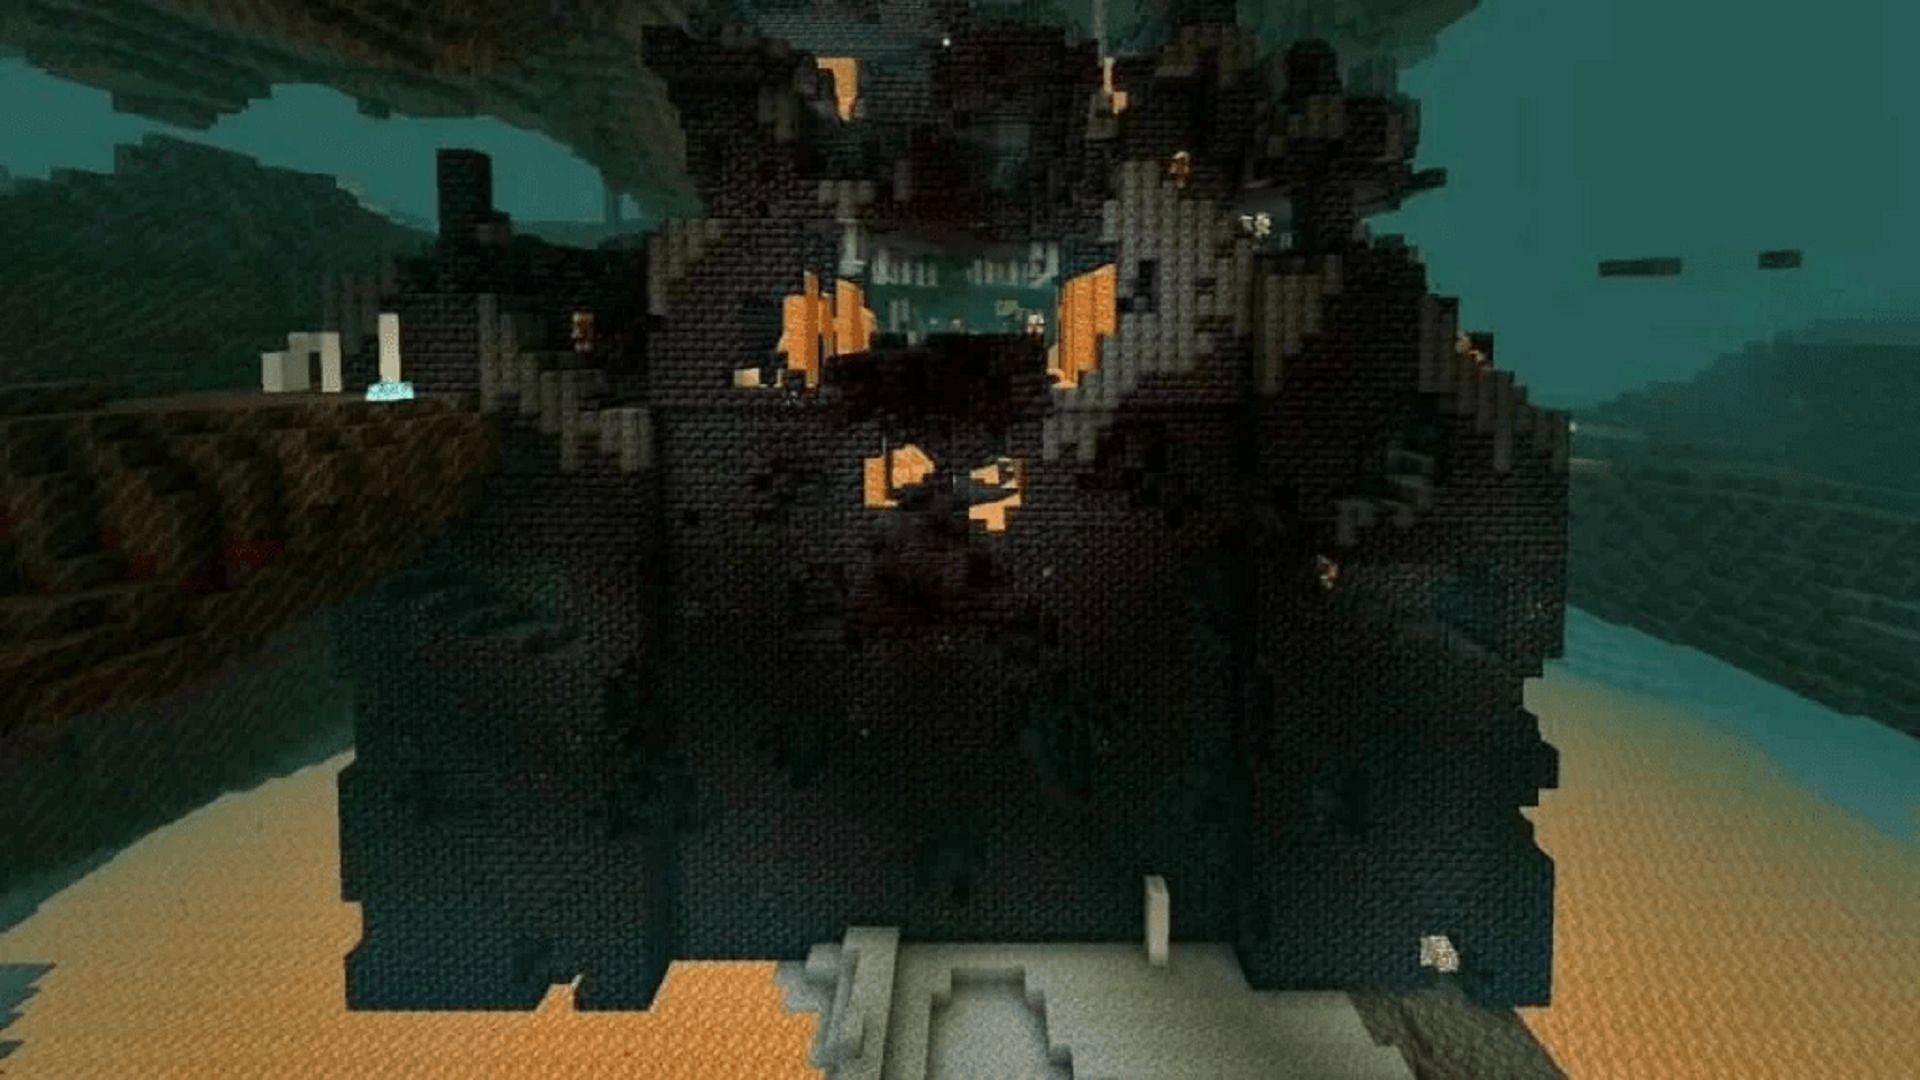 Bastion remnants are stocked to the brim with loot if Minecraft players are willing to brave them (Image via Mojang)